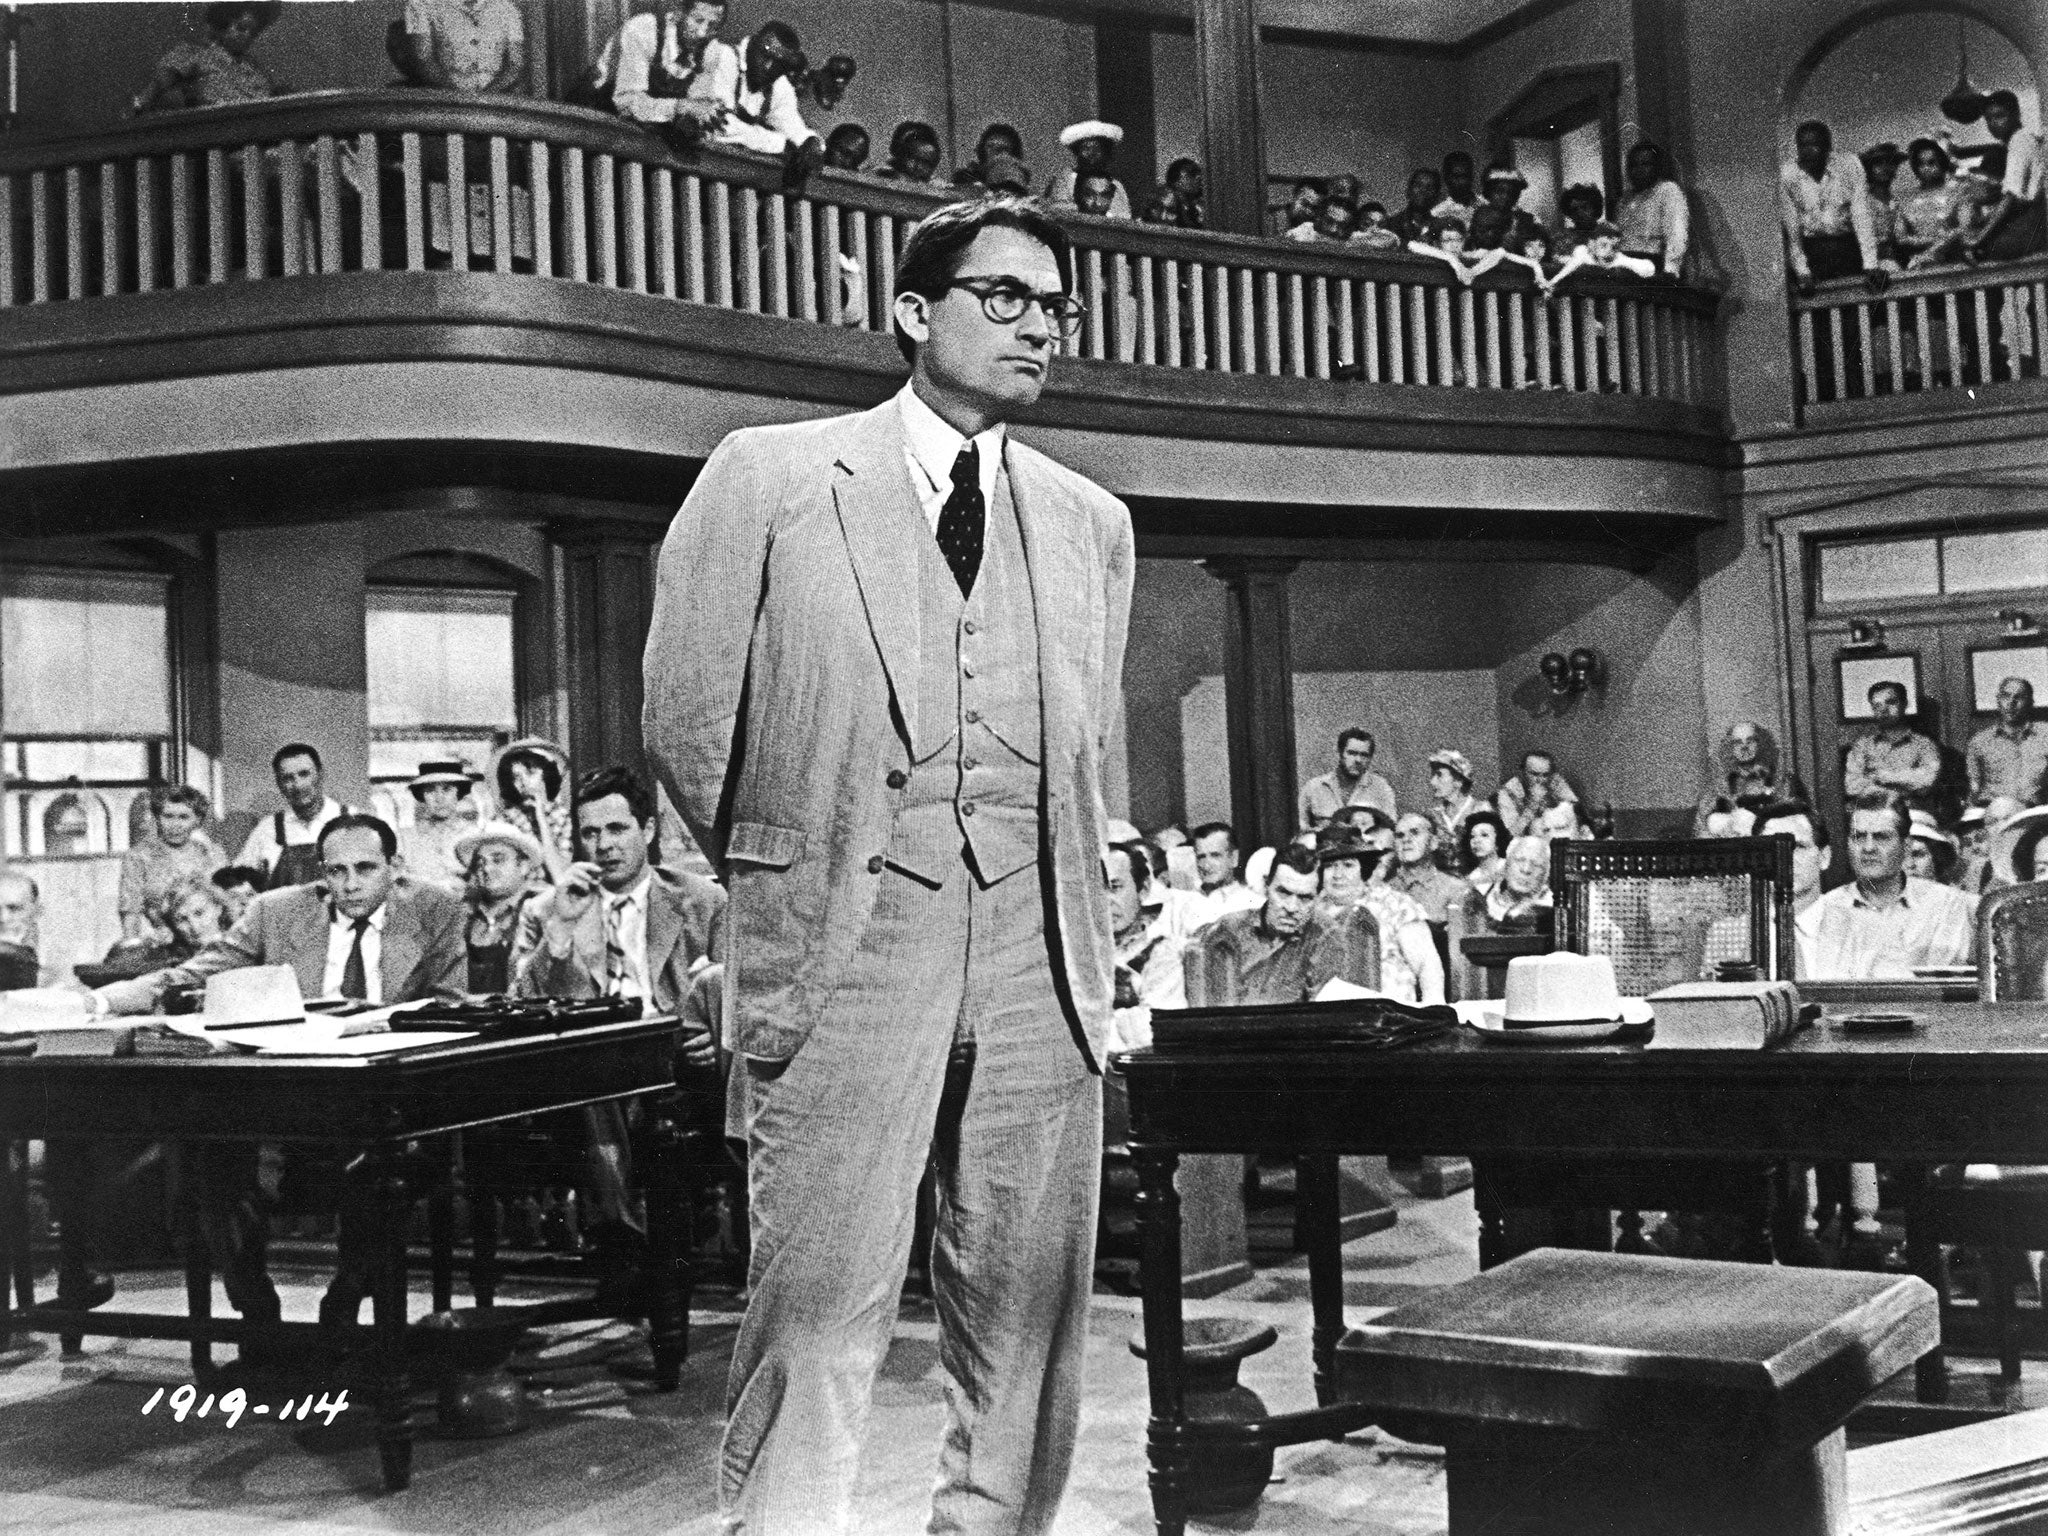 Gregory Peck as Atticus Finch in the 1962 film adaptation of Harper Lee’s To Kill a Mockingbird